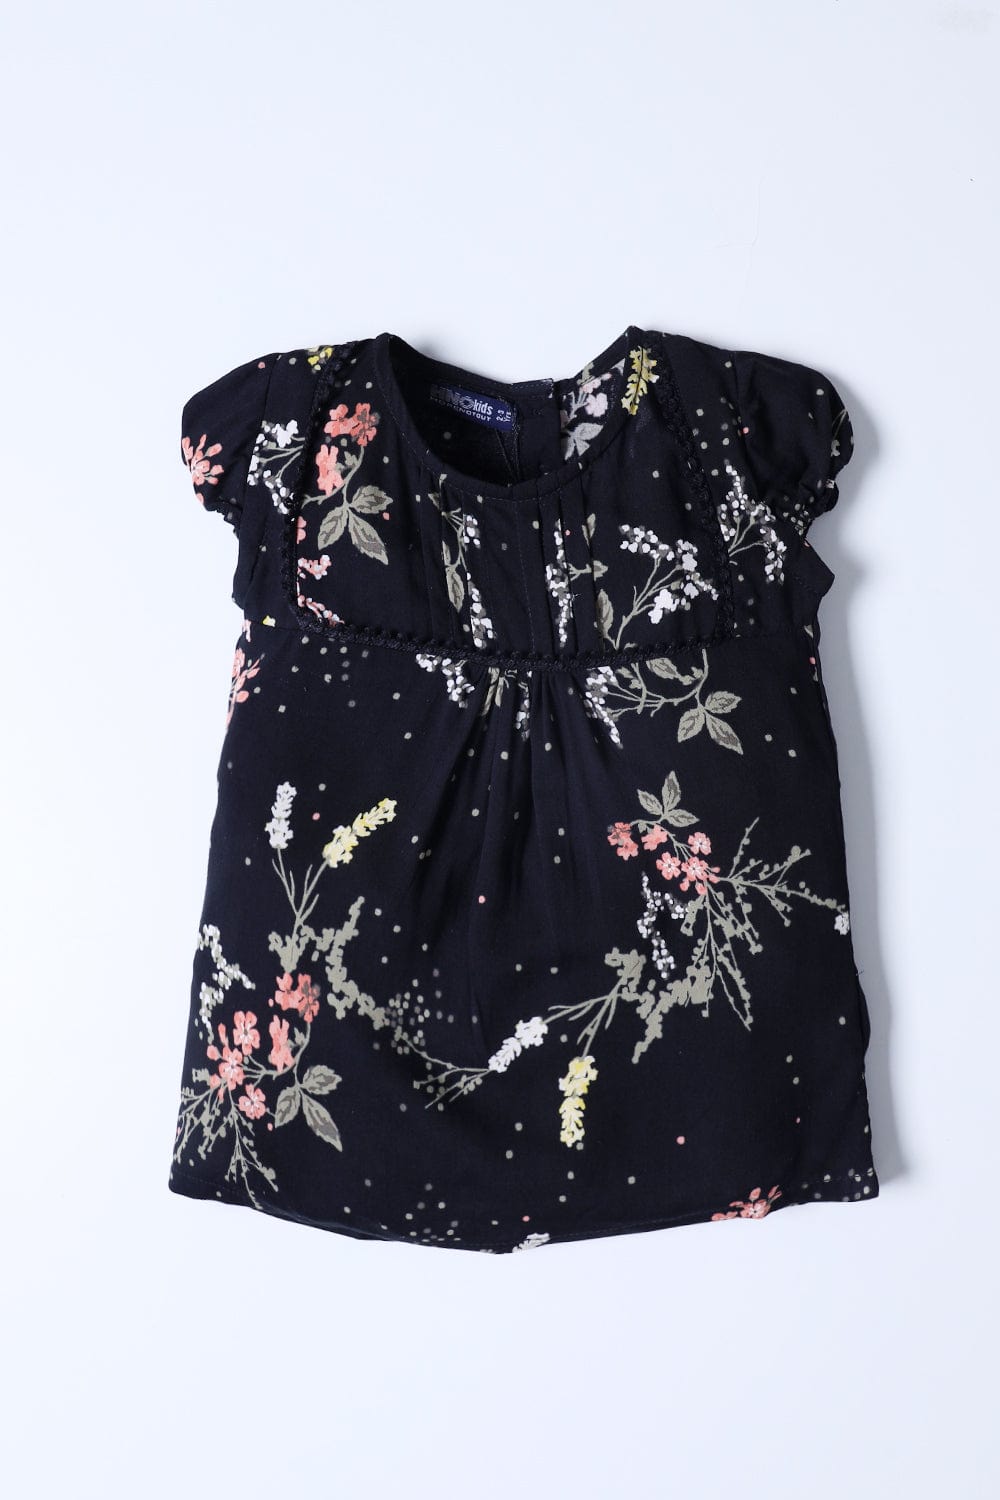 Hope Not Out by Shahid Afridi Girls Woven Dresses Flower Printed Top